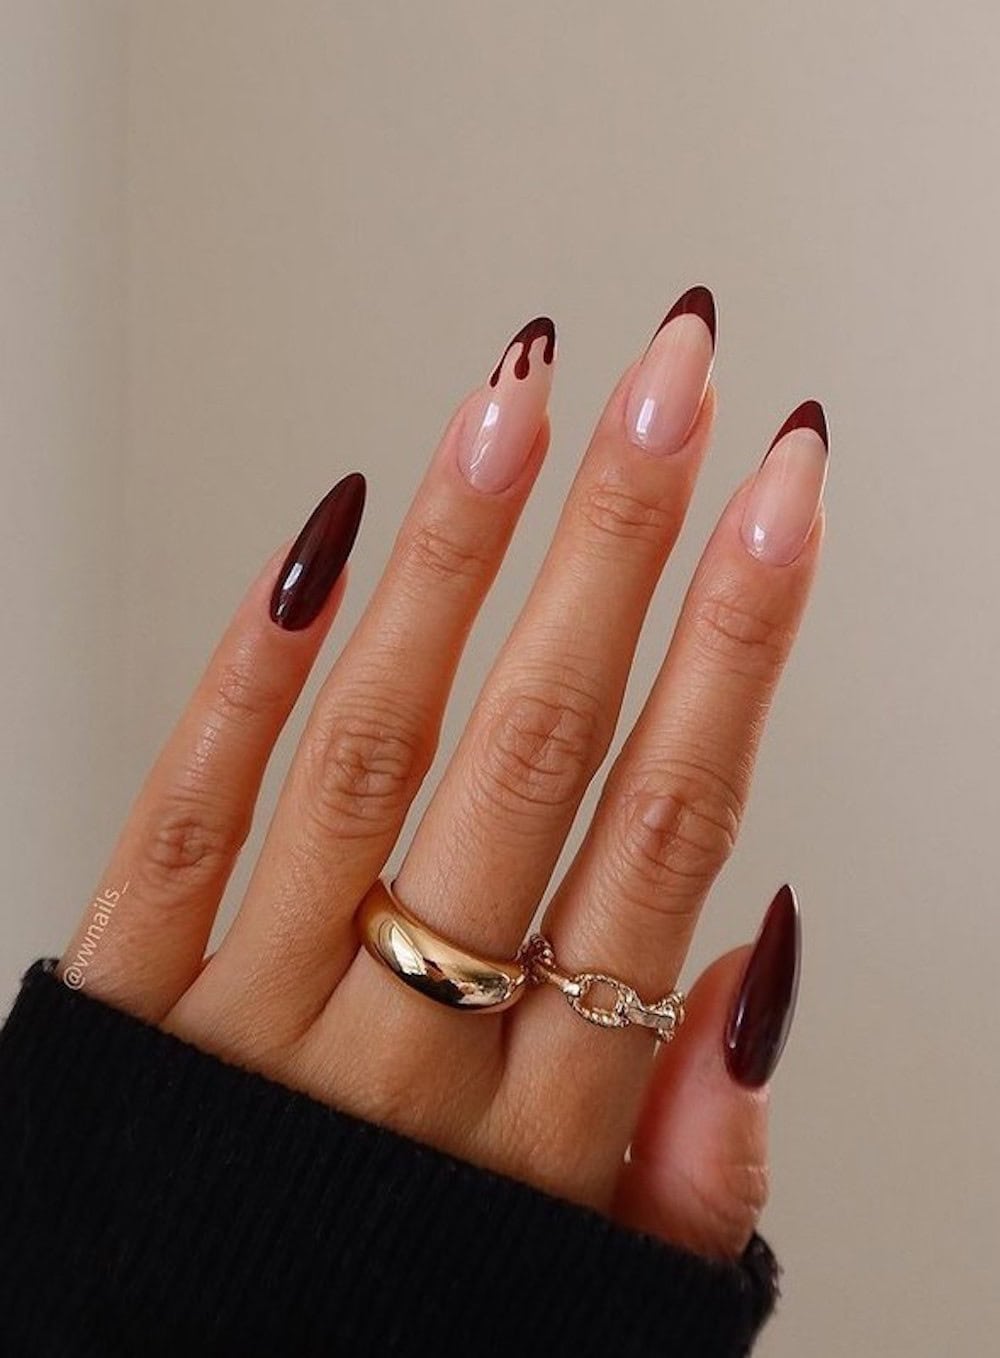 long nude almond nails with dark red tips, solid accent nails, and a dripping tip accent nail